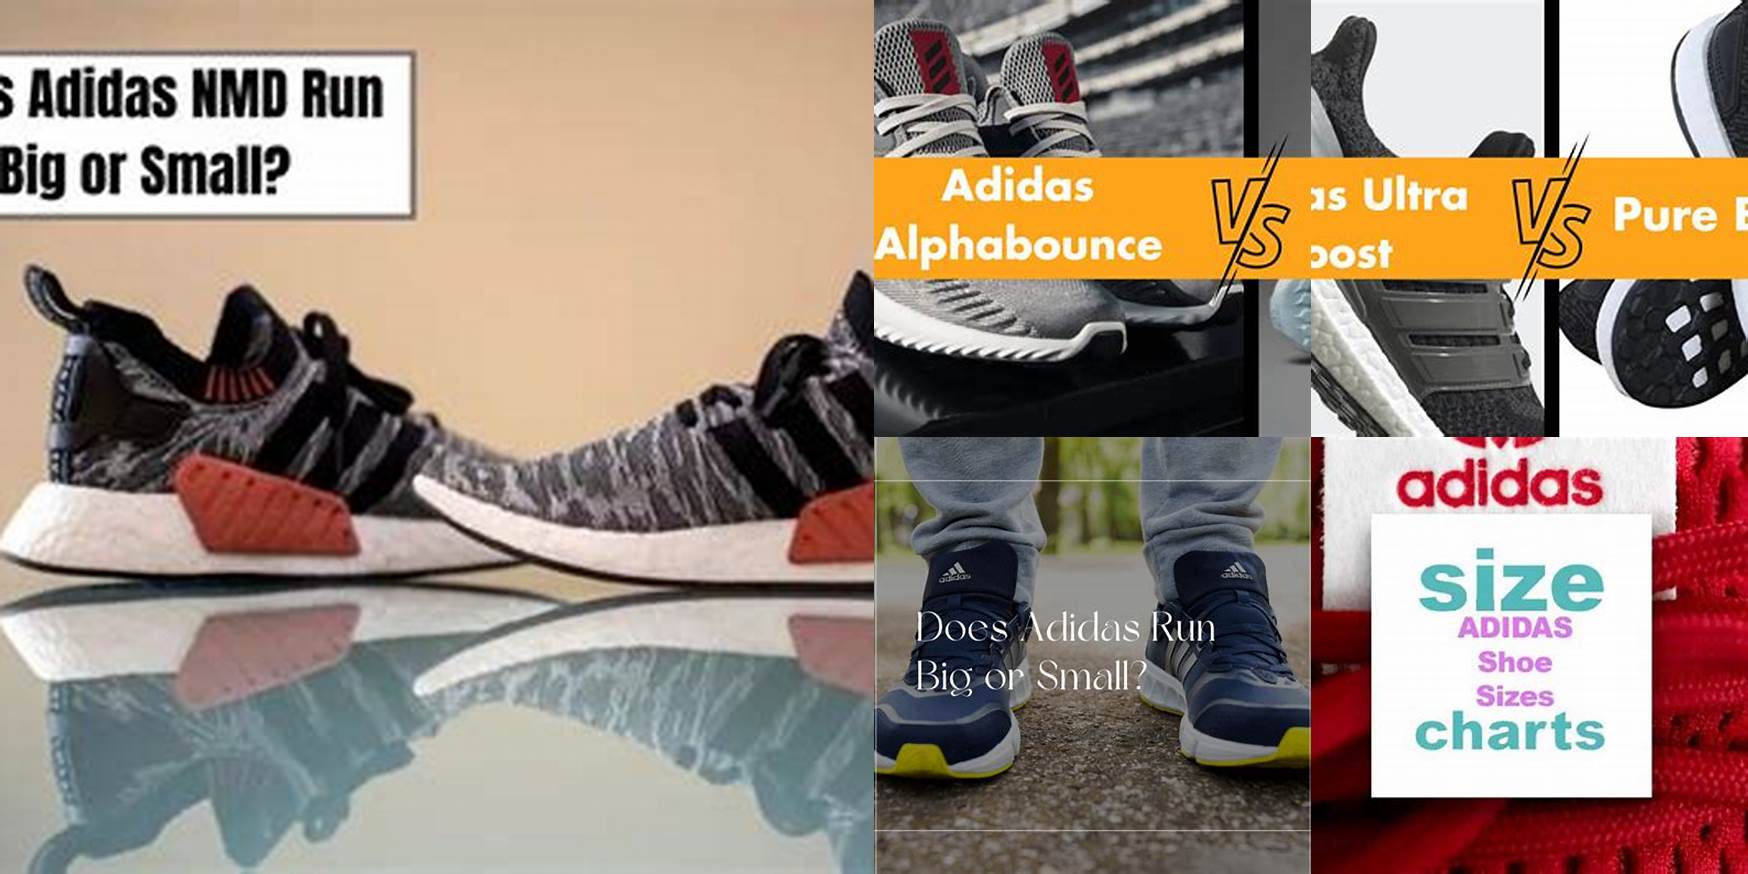 Does Adidas Shoes Run Big Or Small